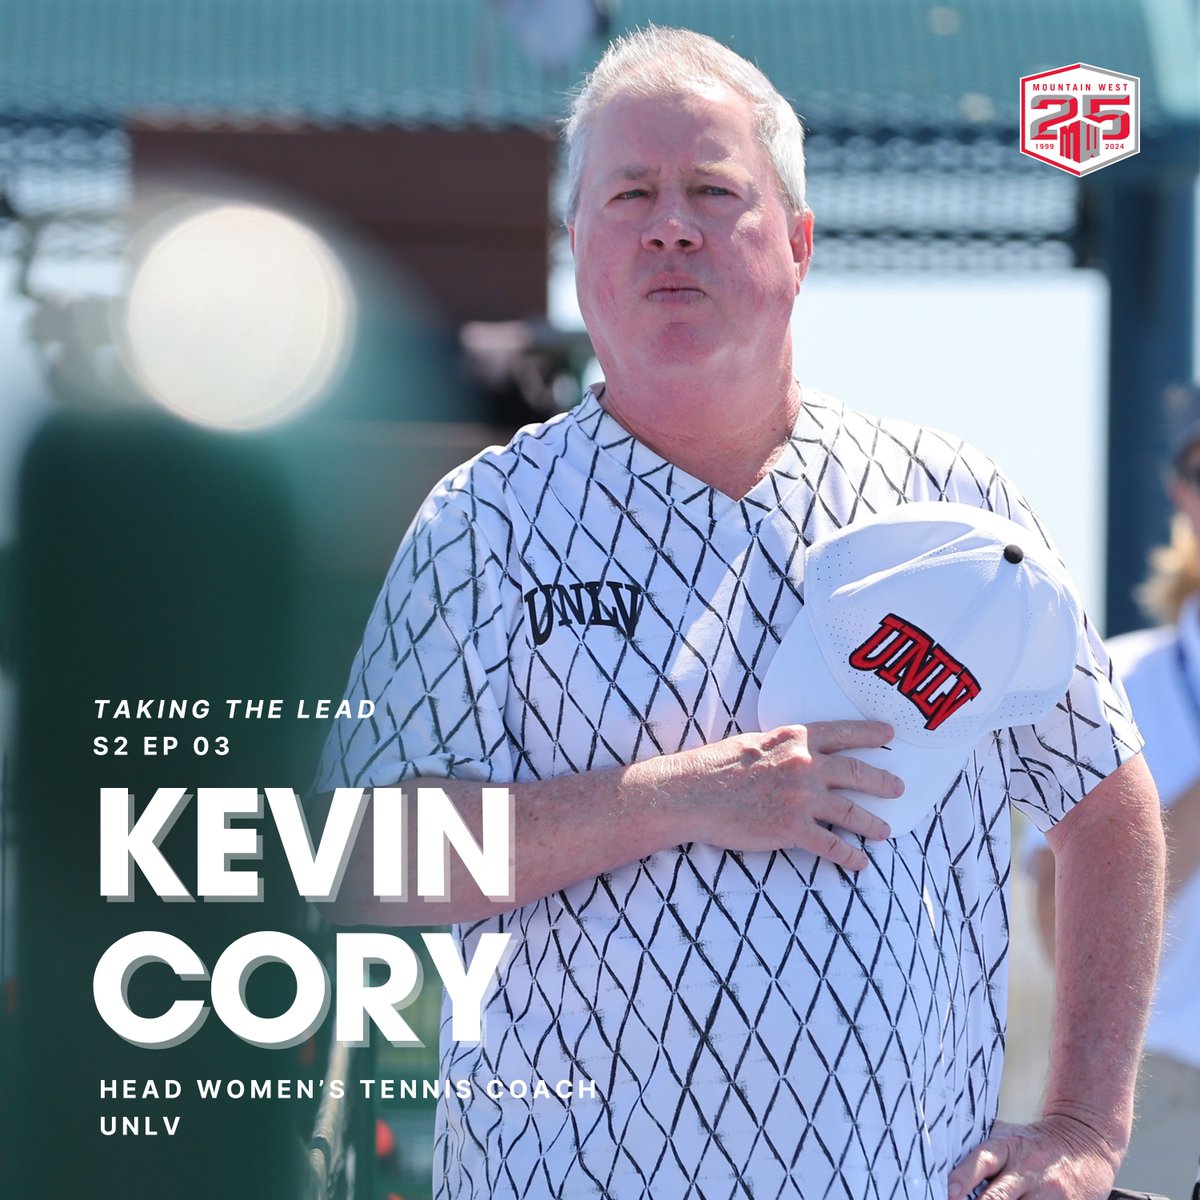 🎙️ 𝙏𝙖𝙠𝙞𝙣𝙜 𝙩𝙝𝙚 𝙇𝙚𝙖𝙙 🎙️ The winningest coach in #MWWTEN history joins @Bridget_Howard8 on today's episode! @UNLVWTennis HC Kevin Cory recently reached 400 career wins and after 25 years, is calling it a career 👏🏻🎾🏆 🎧: open.spotify.com/episode/3IOxrC… #TakingtheLead